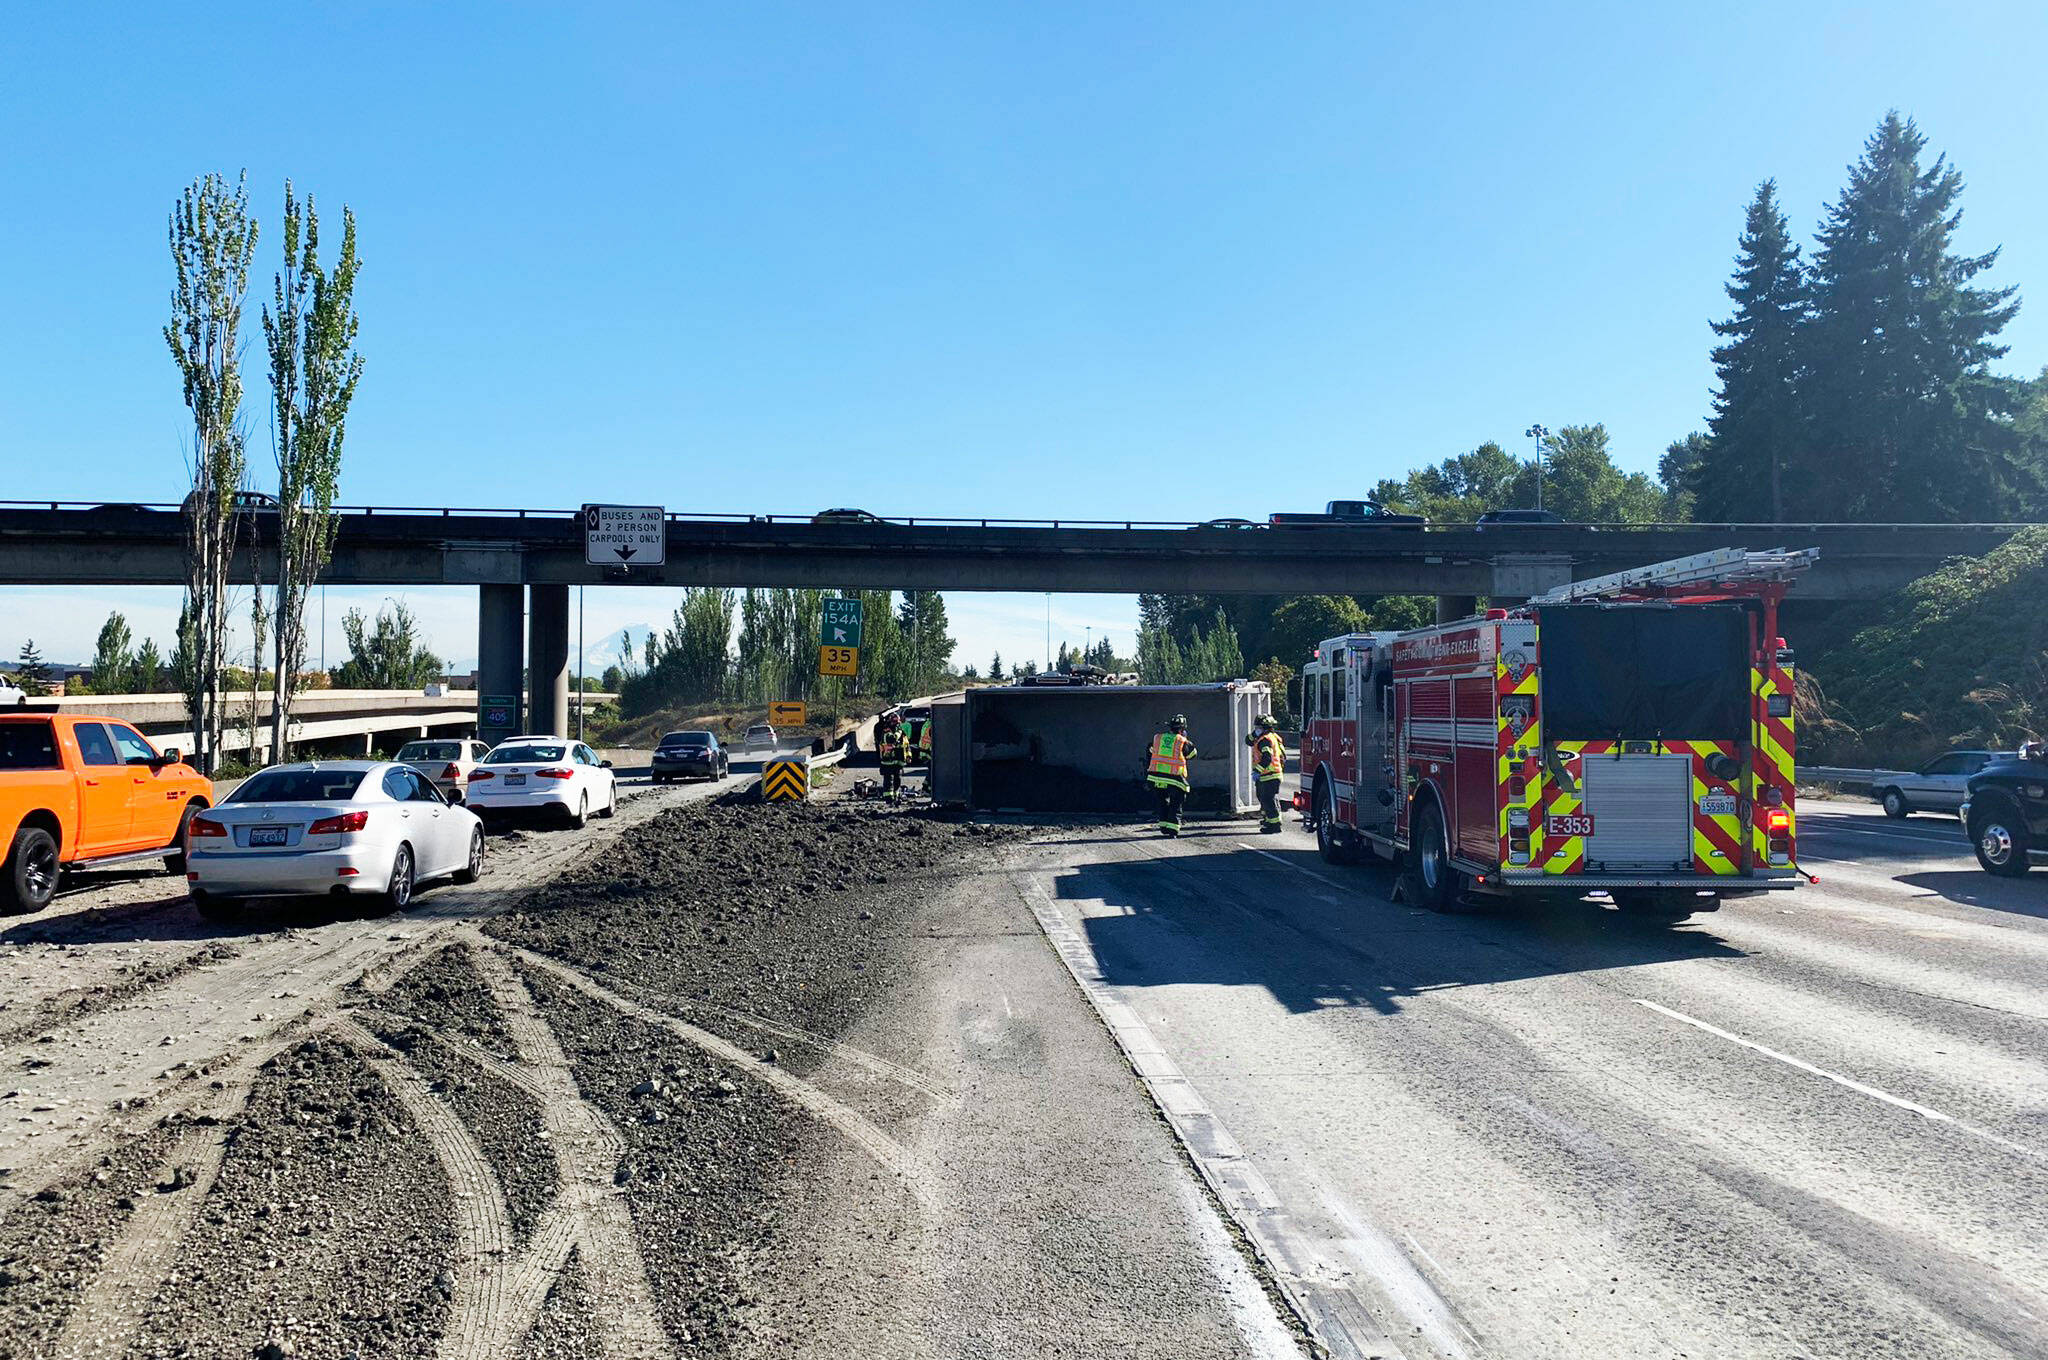 A semi flipped on its side and spilled gravel and other debris Tuesday afternoon, Sept. 21 along southbound Interstate 5 at the I-405 Renton exit. COURTESY PHOTO, State Patrol